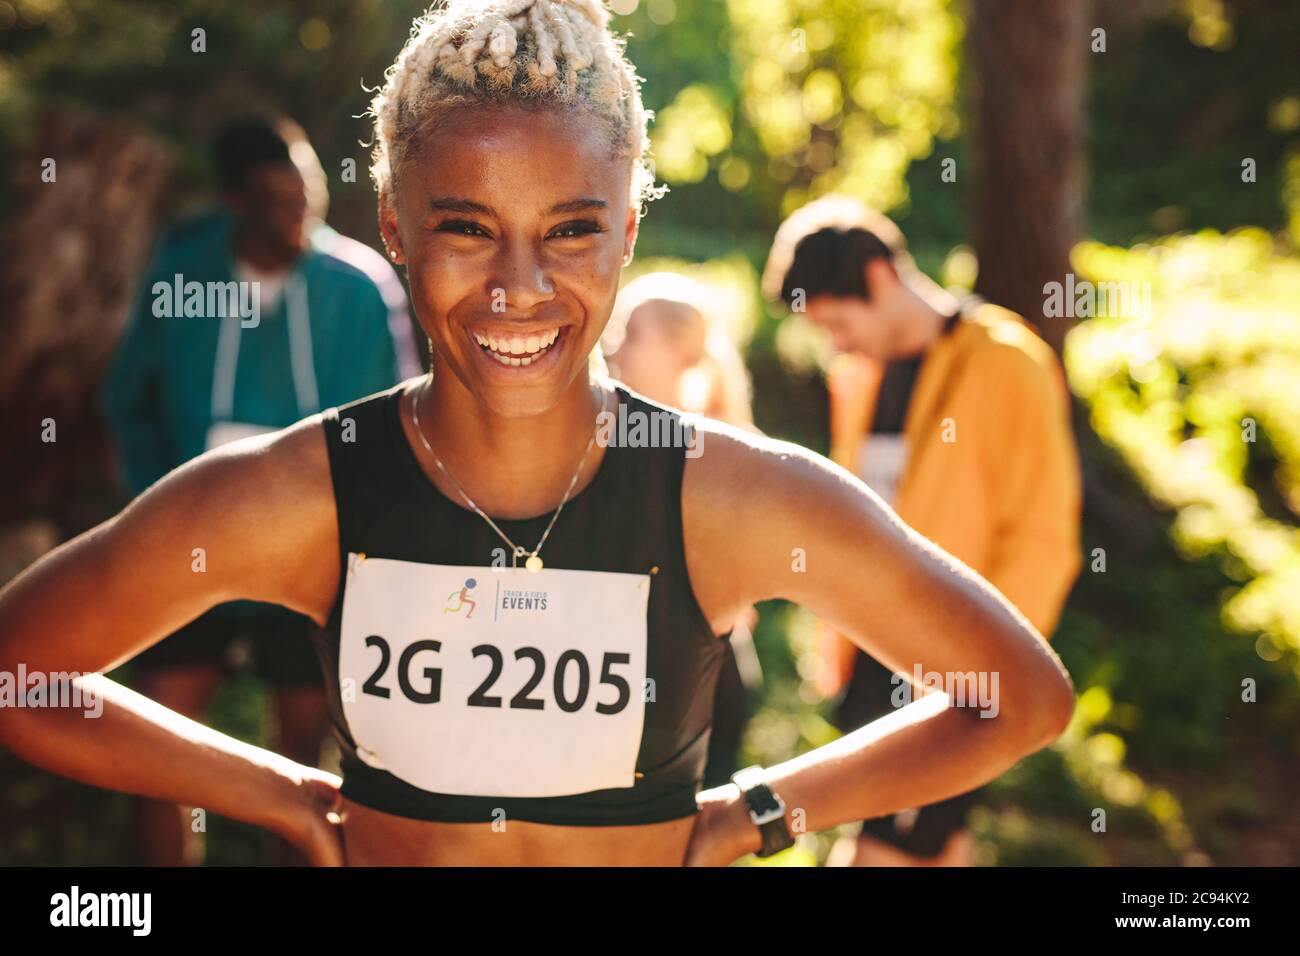 Female cross country marathon runner smiling outdoors. Sportswoman laughing outdoors with her club members in background. Stock Photo